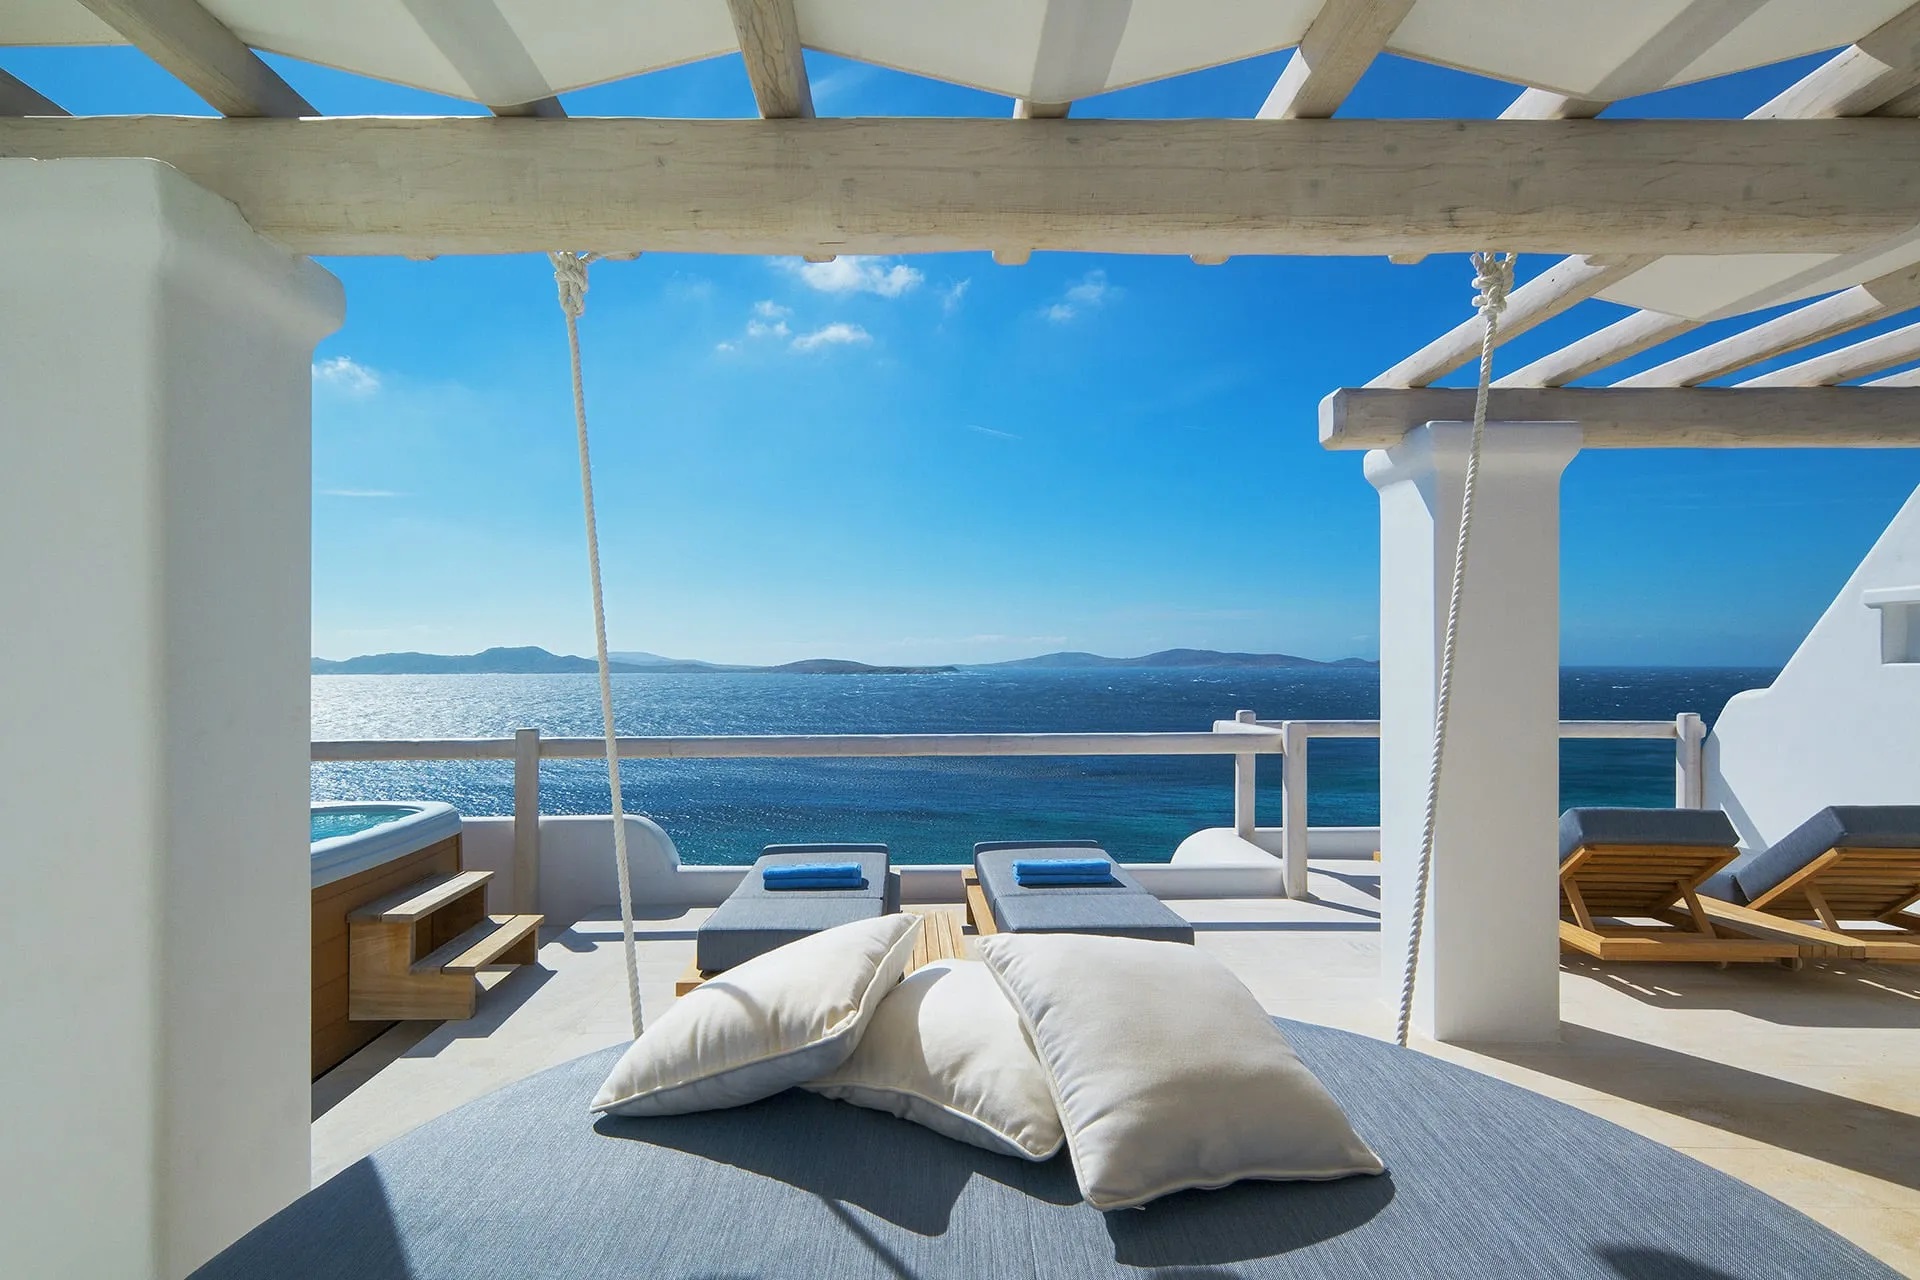 Mykonos Grand Hotel & Resort is a barefoot luxury hotel with a grand tradition